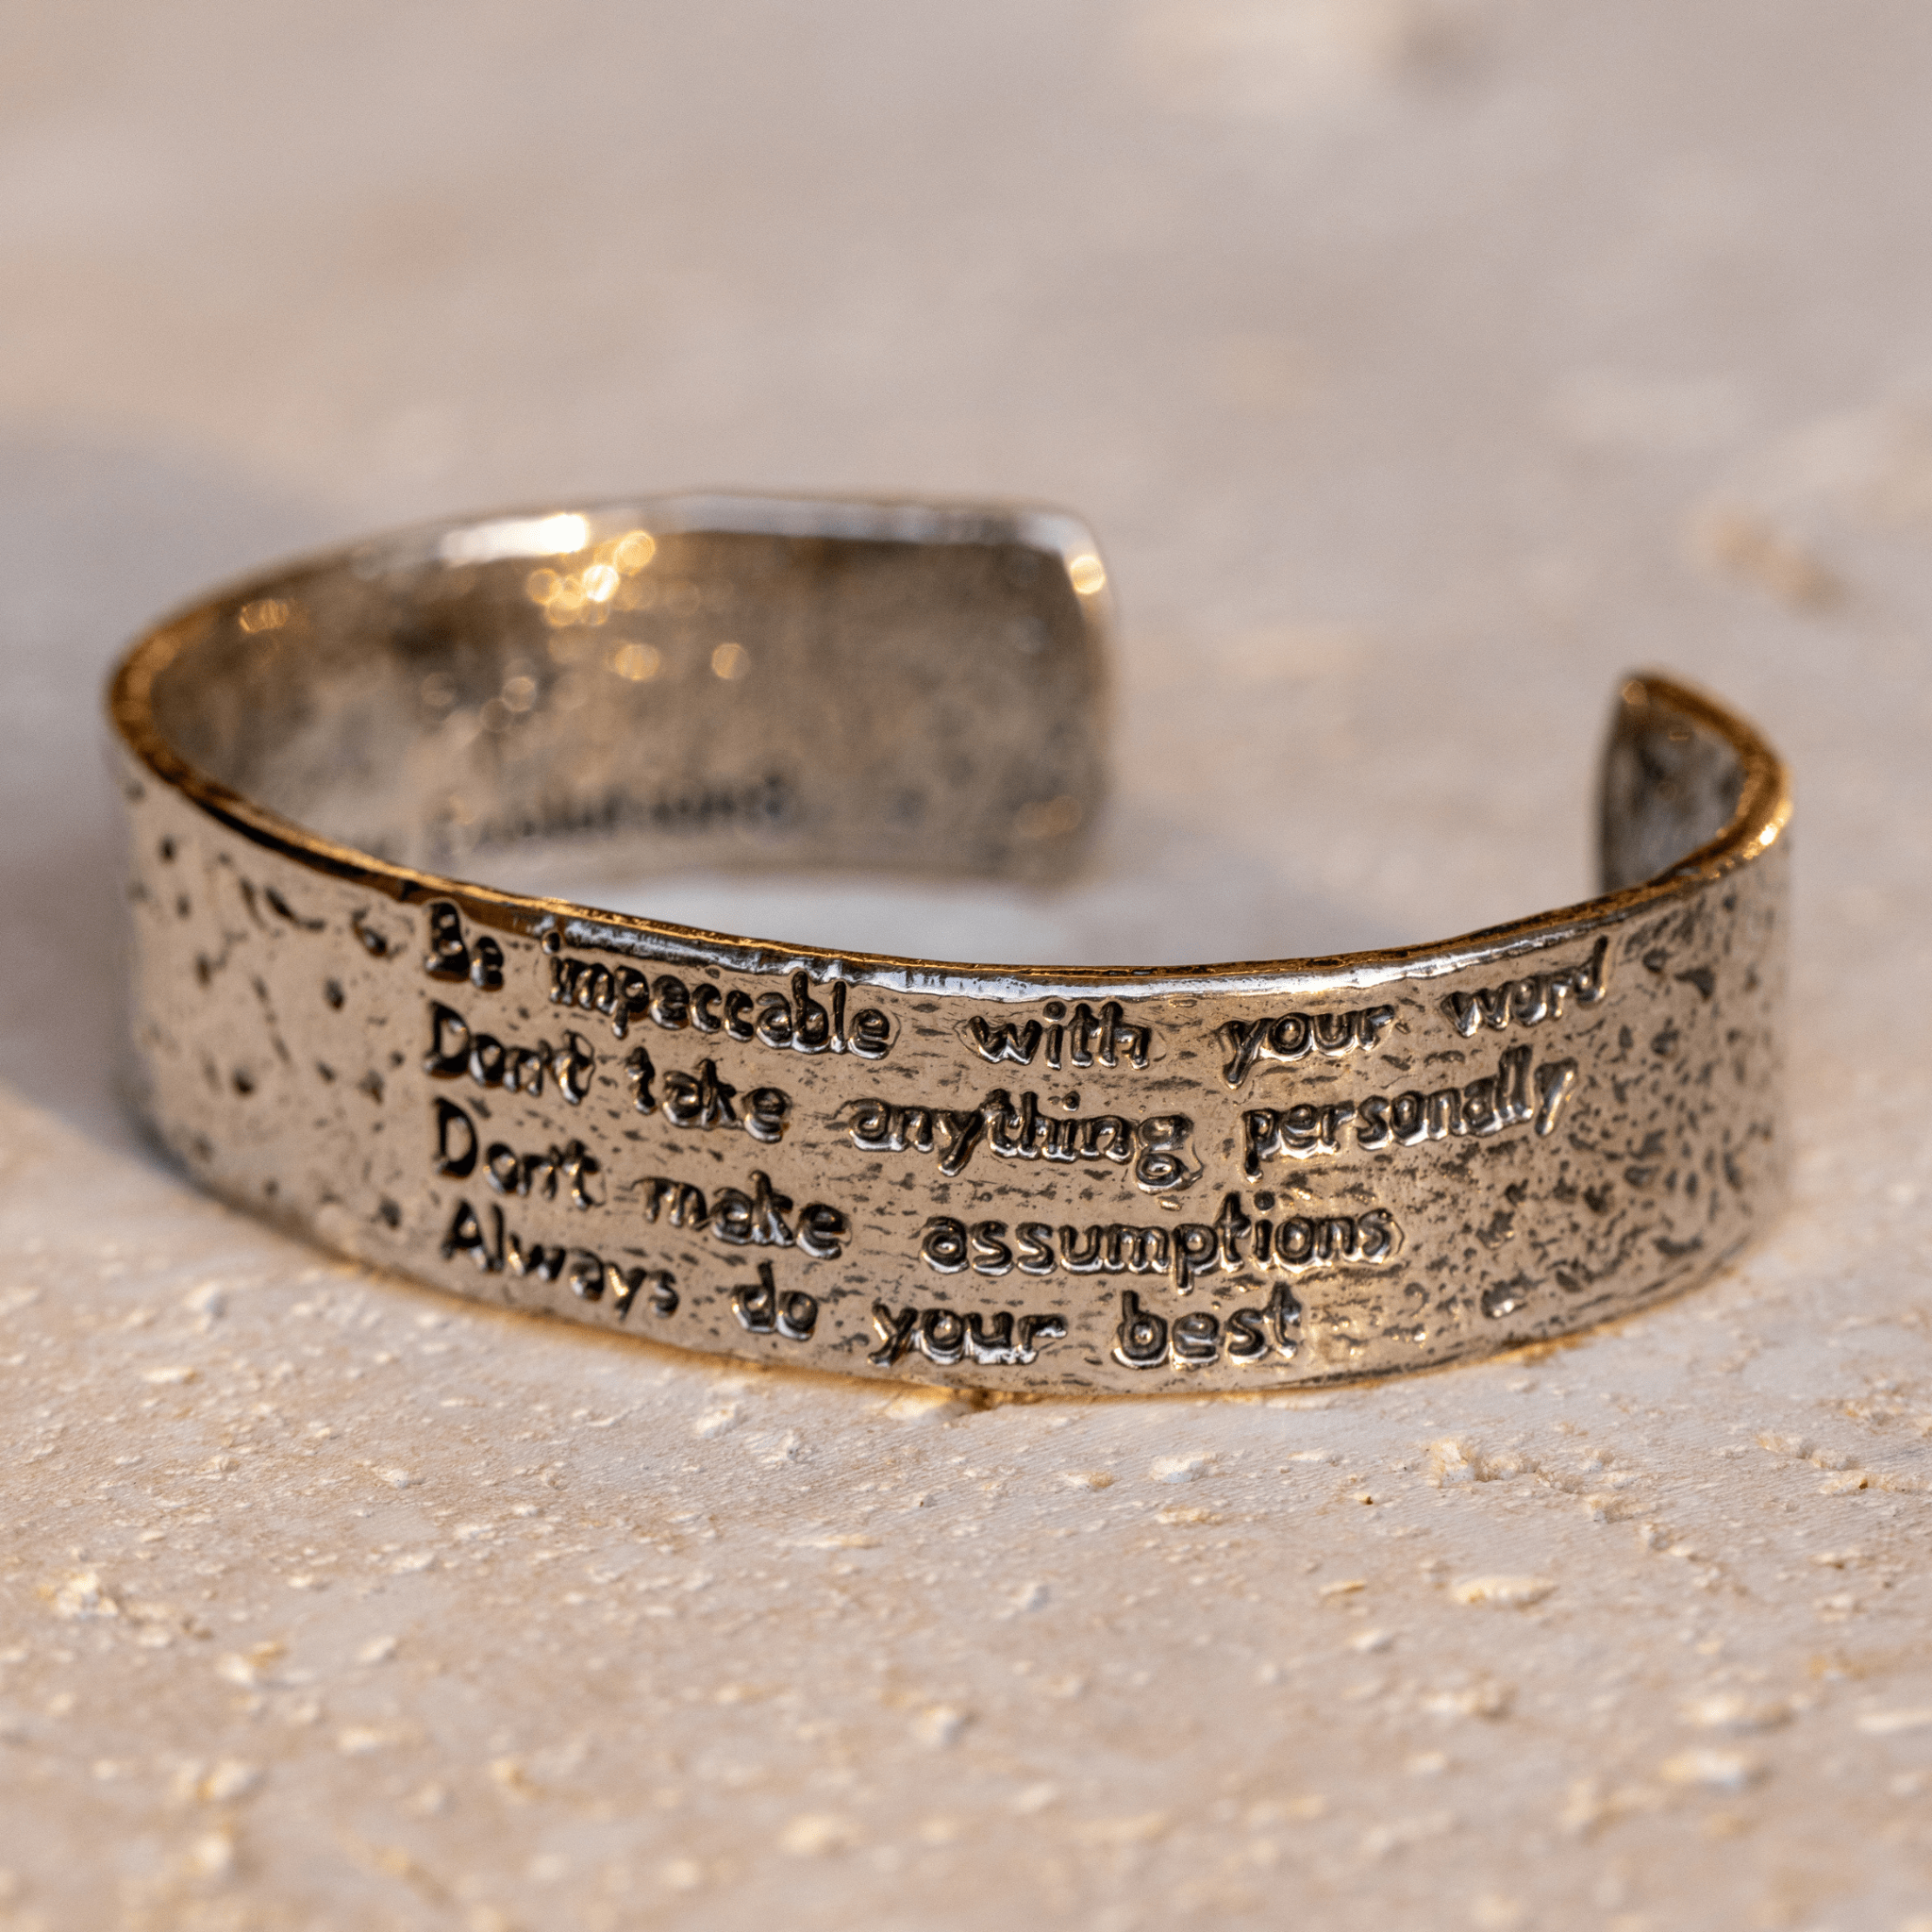 Jewelry Evolution Bracelet The Four Agreements Textured Cuff